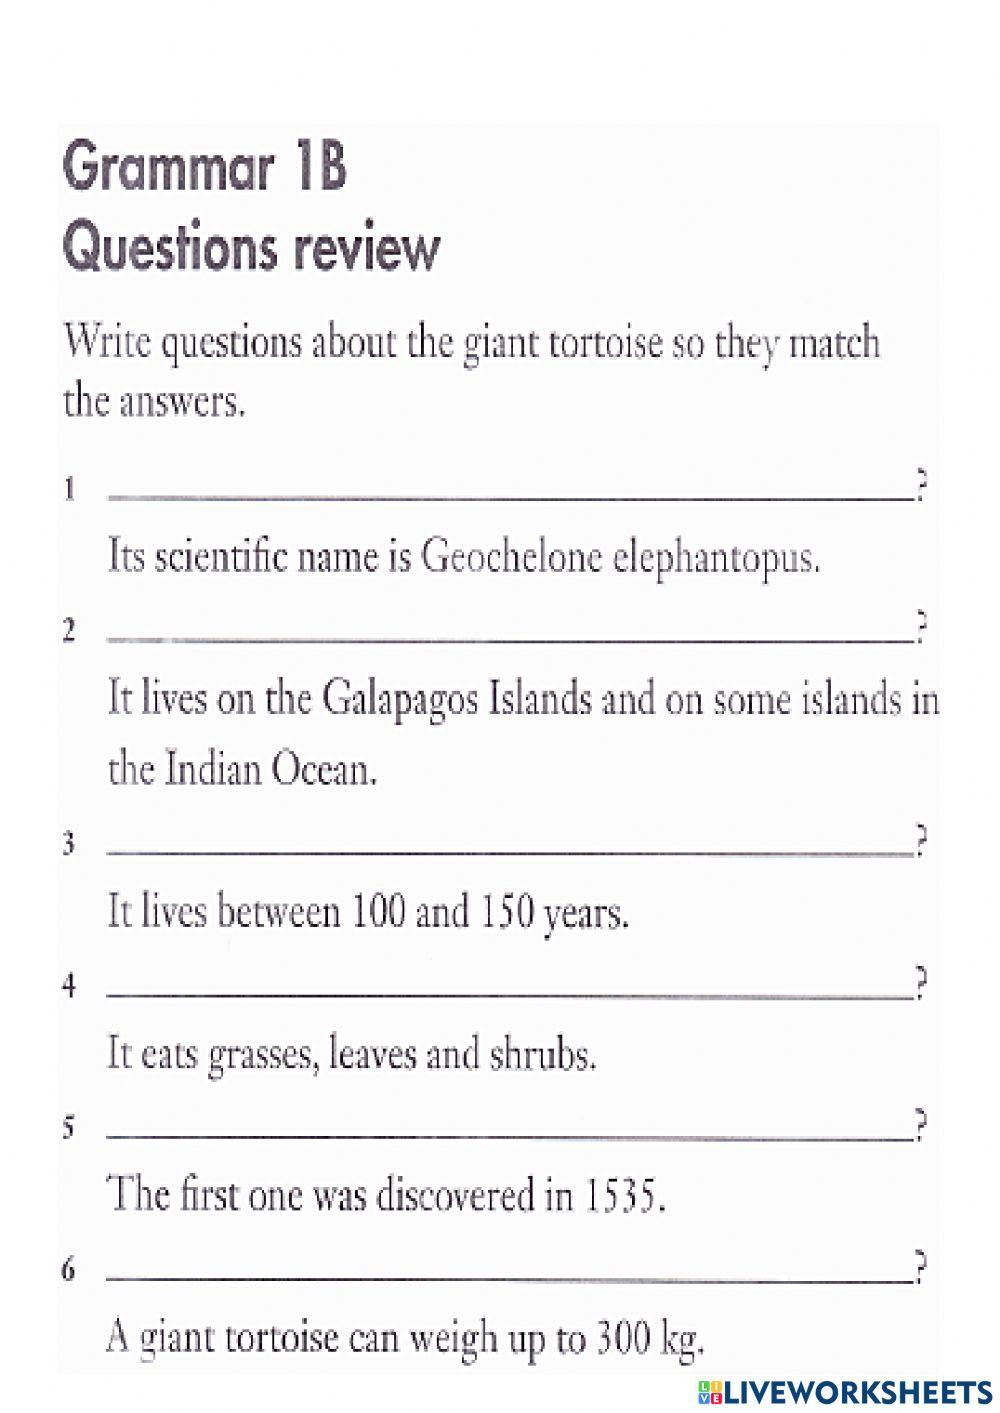 Questions review